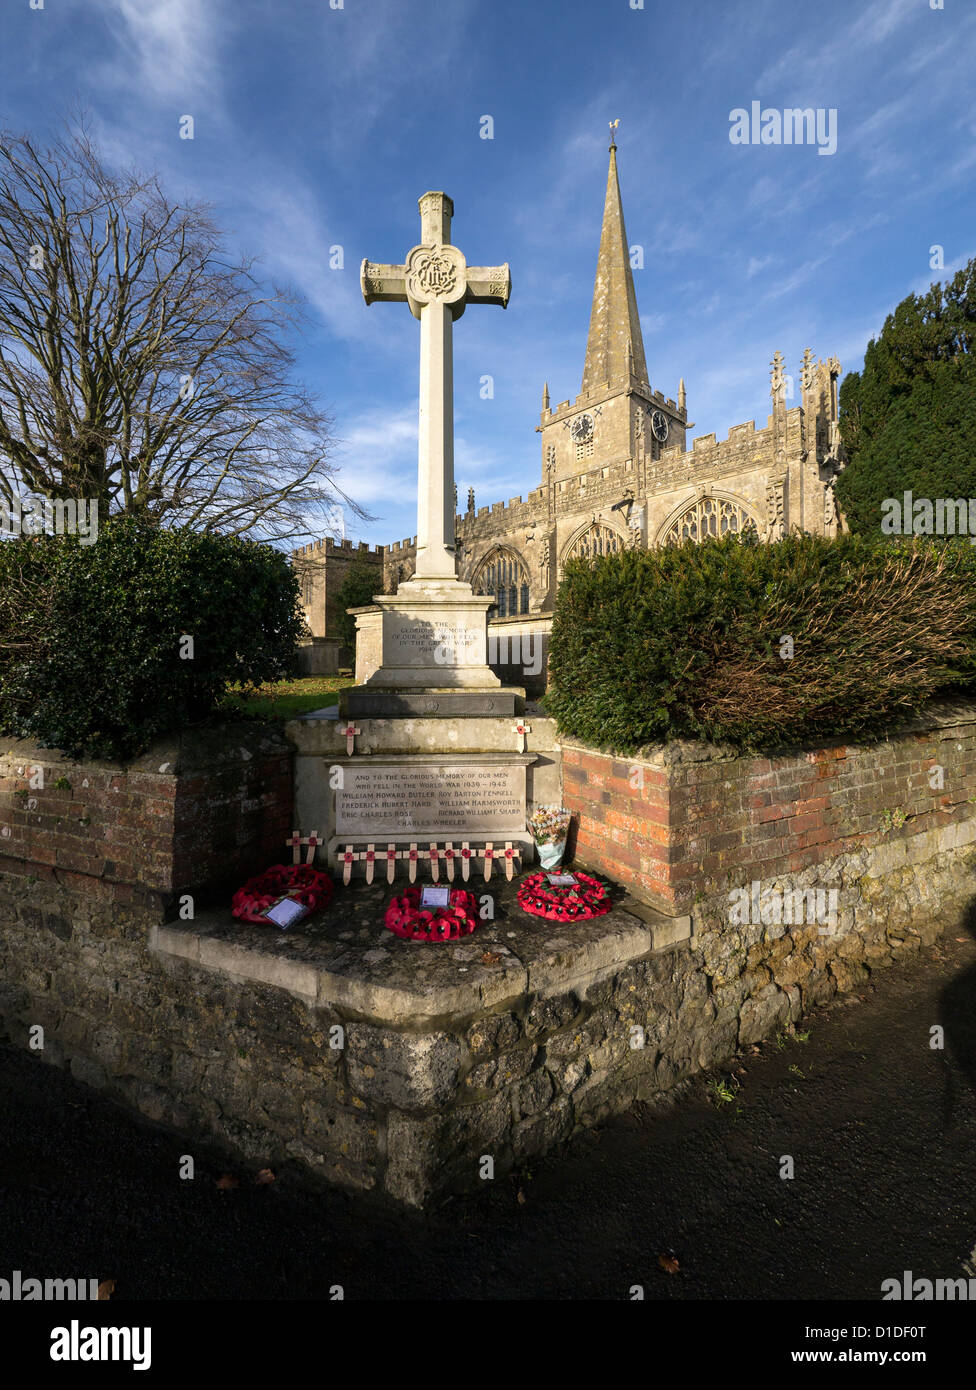 The Parish Church of St. Nicholas, Bromham (Parish of Bromham, Chittoe and Sandy Lane), with the War Memorial in front. Stock Photo